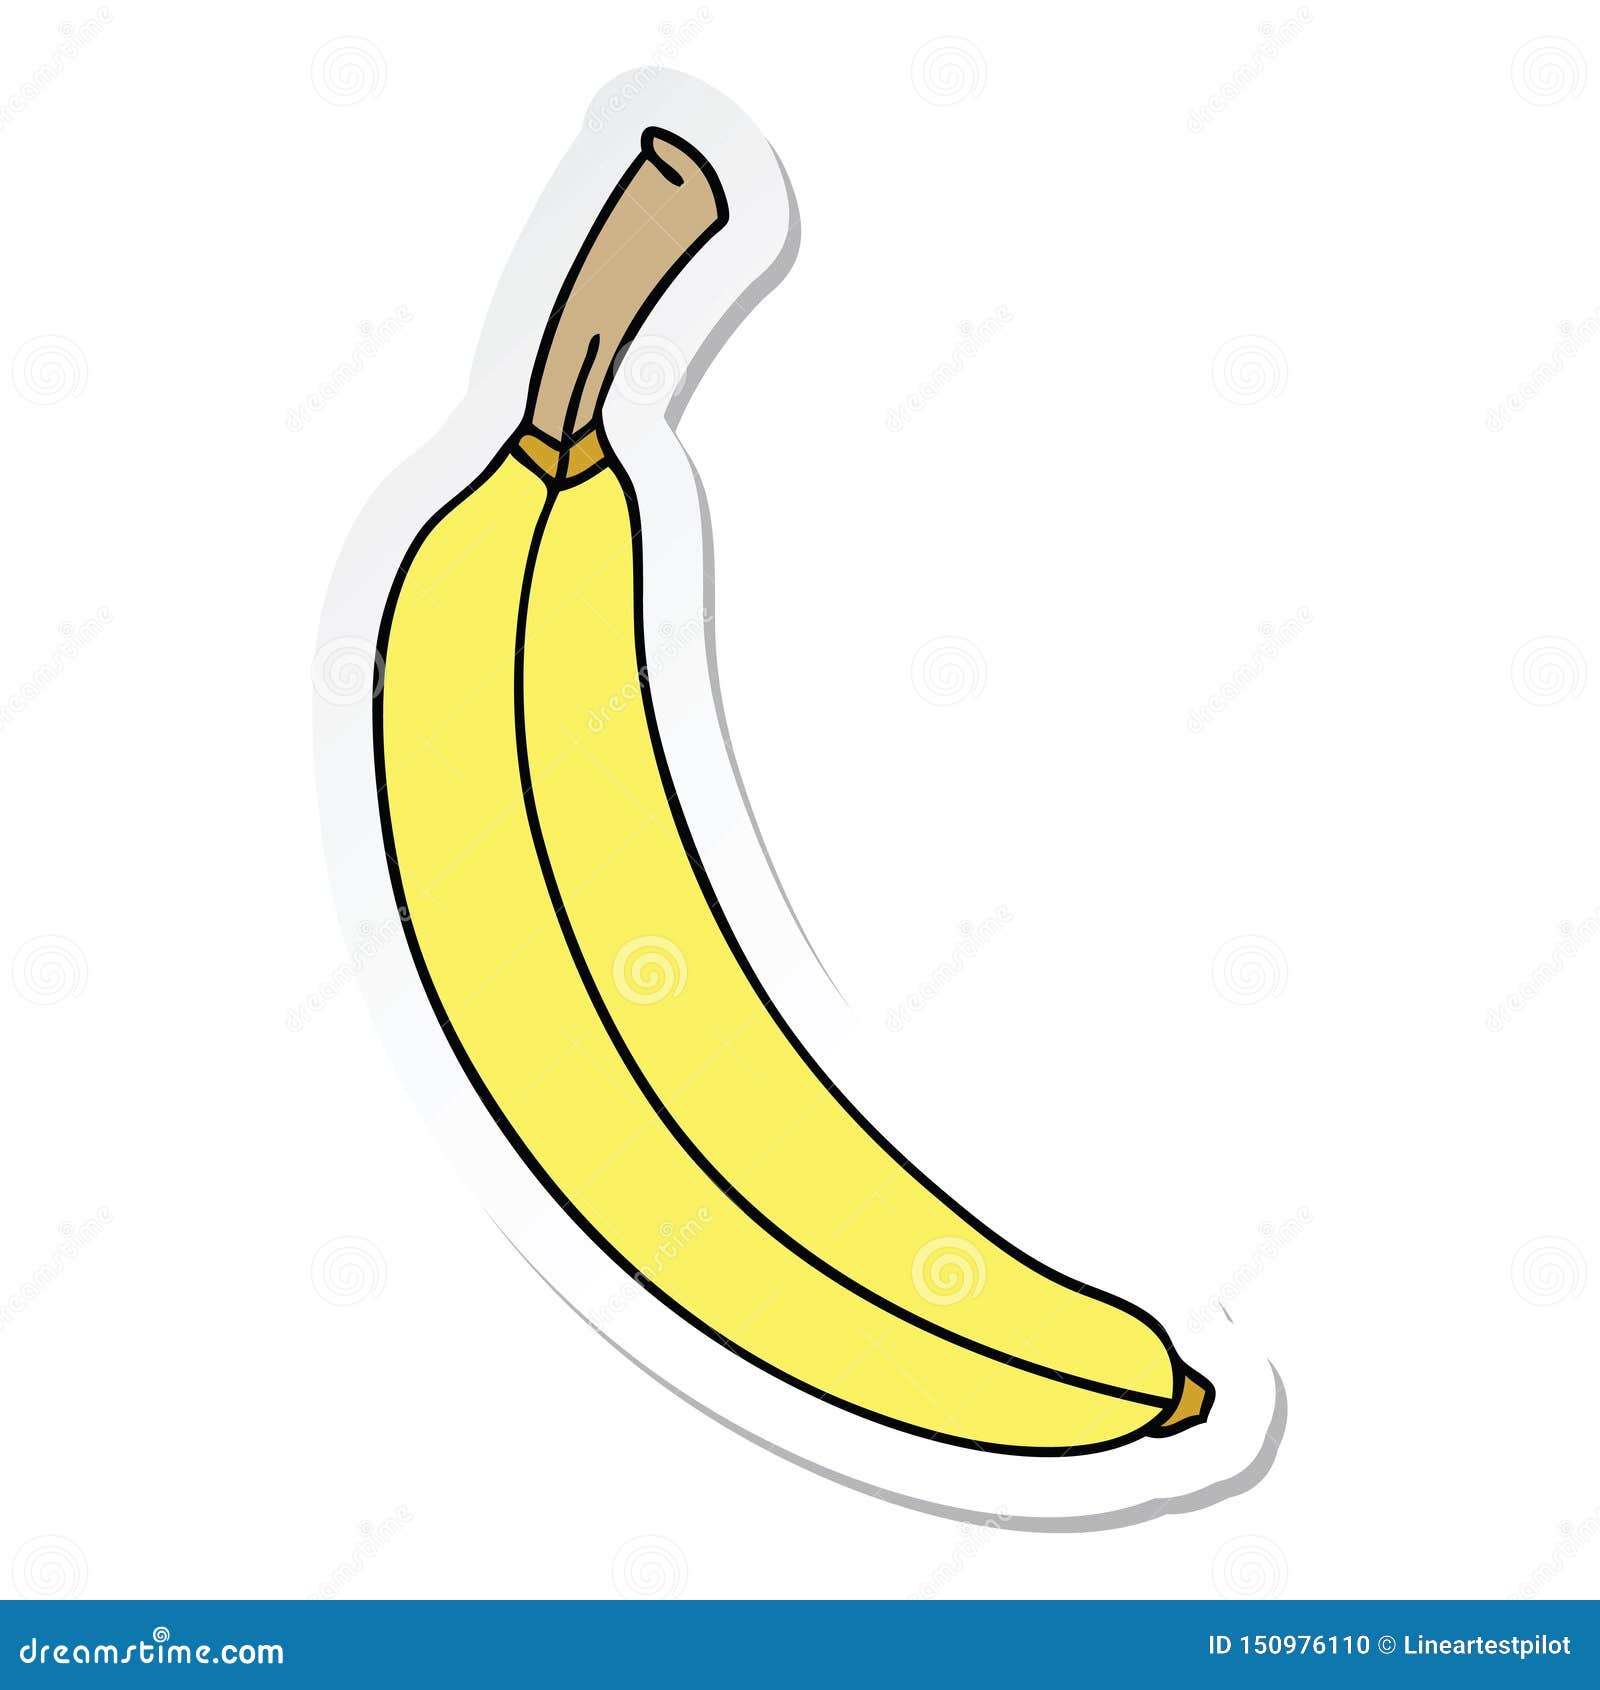 Banana Fruit Object Cute Cartoon Sticker Decal Icon Stick Character Doodle  Drawing Illustration Art Artwork Funny Crazy Quirky Vector Stock  Illustrations – 3 Banana Fruit Object Cute Cartoon Sticker Decal Icon Stick